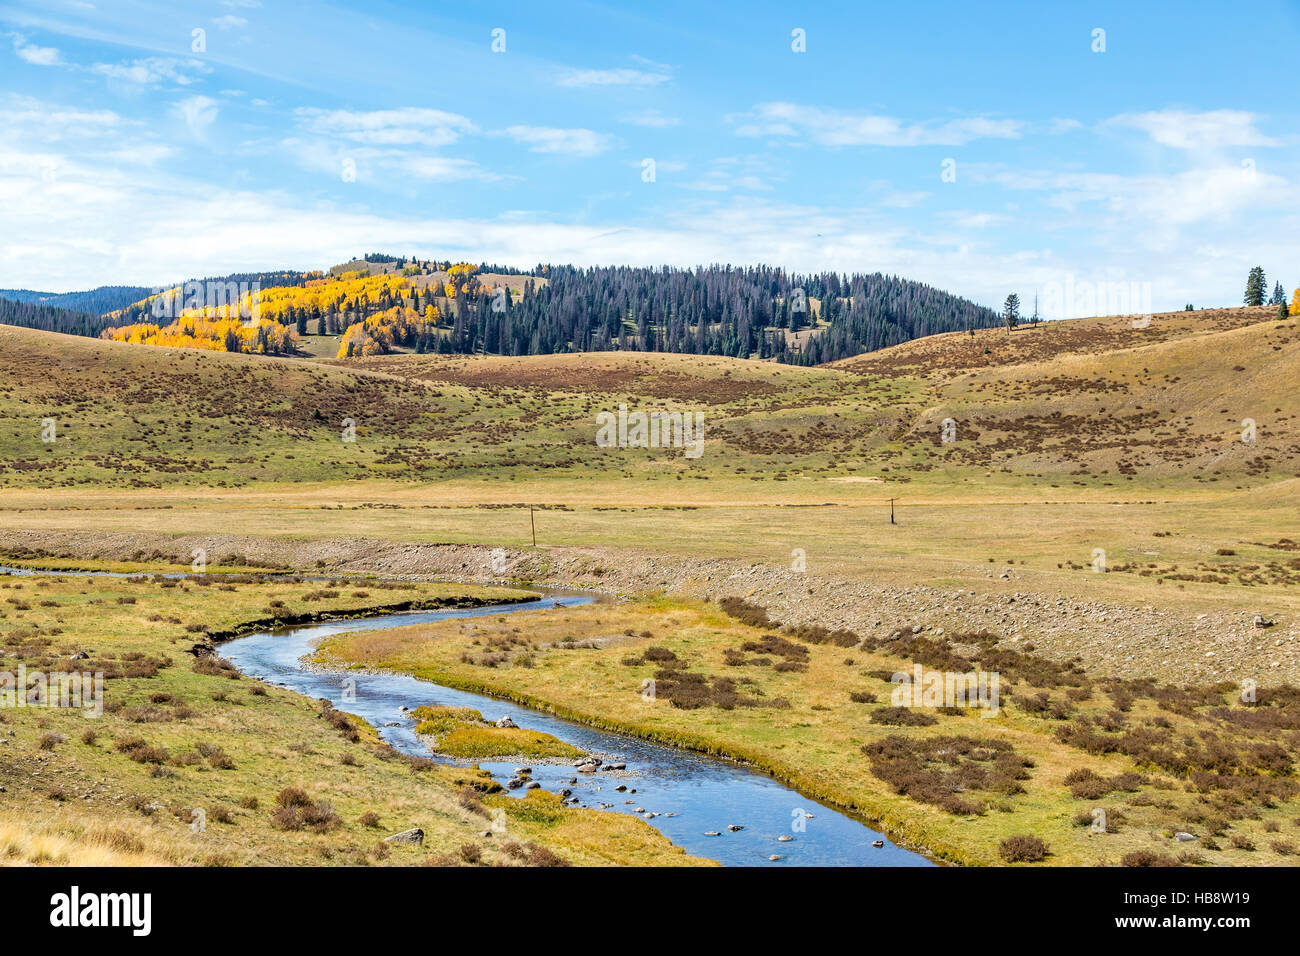 Mountain scenery with streams, valleys, and colorful trees along a train route from Chama, New Mexico to Antonito, Colorado Stock Photo